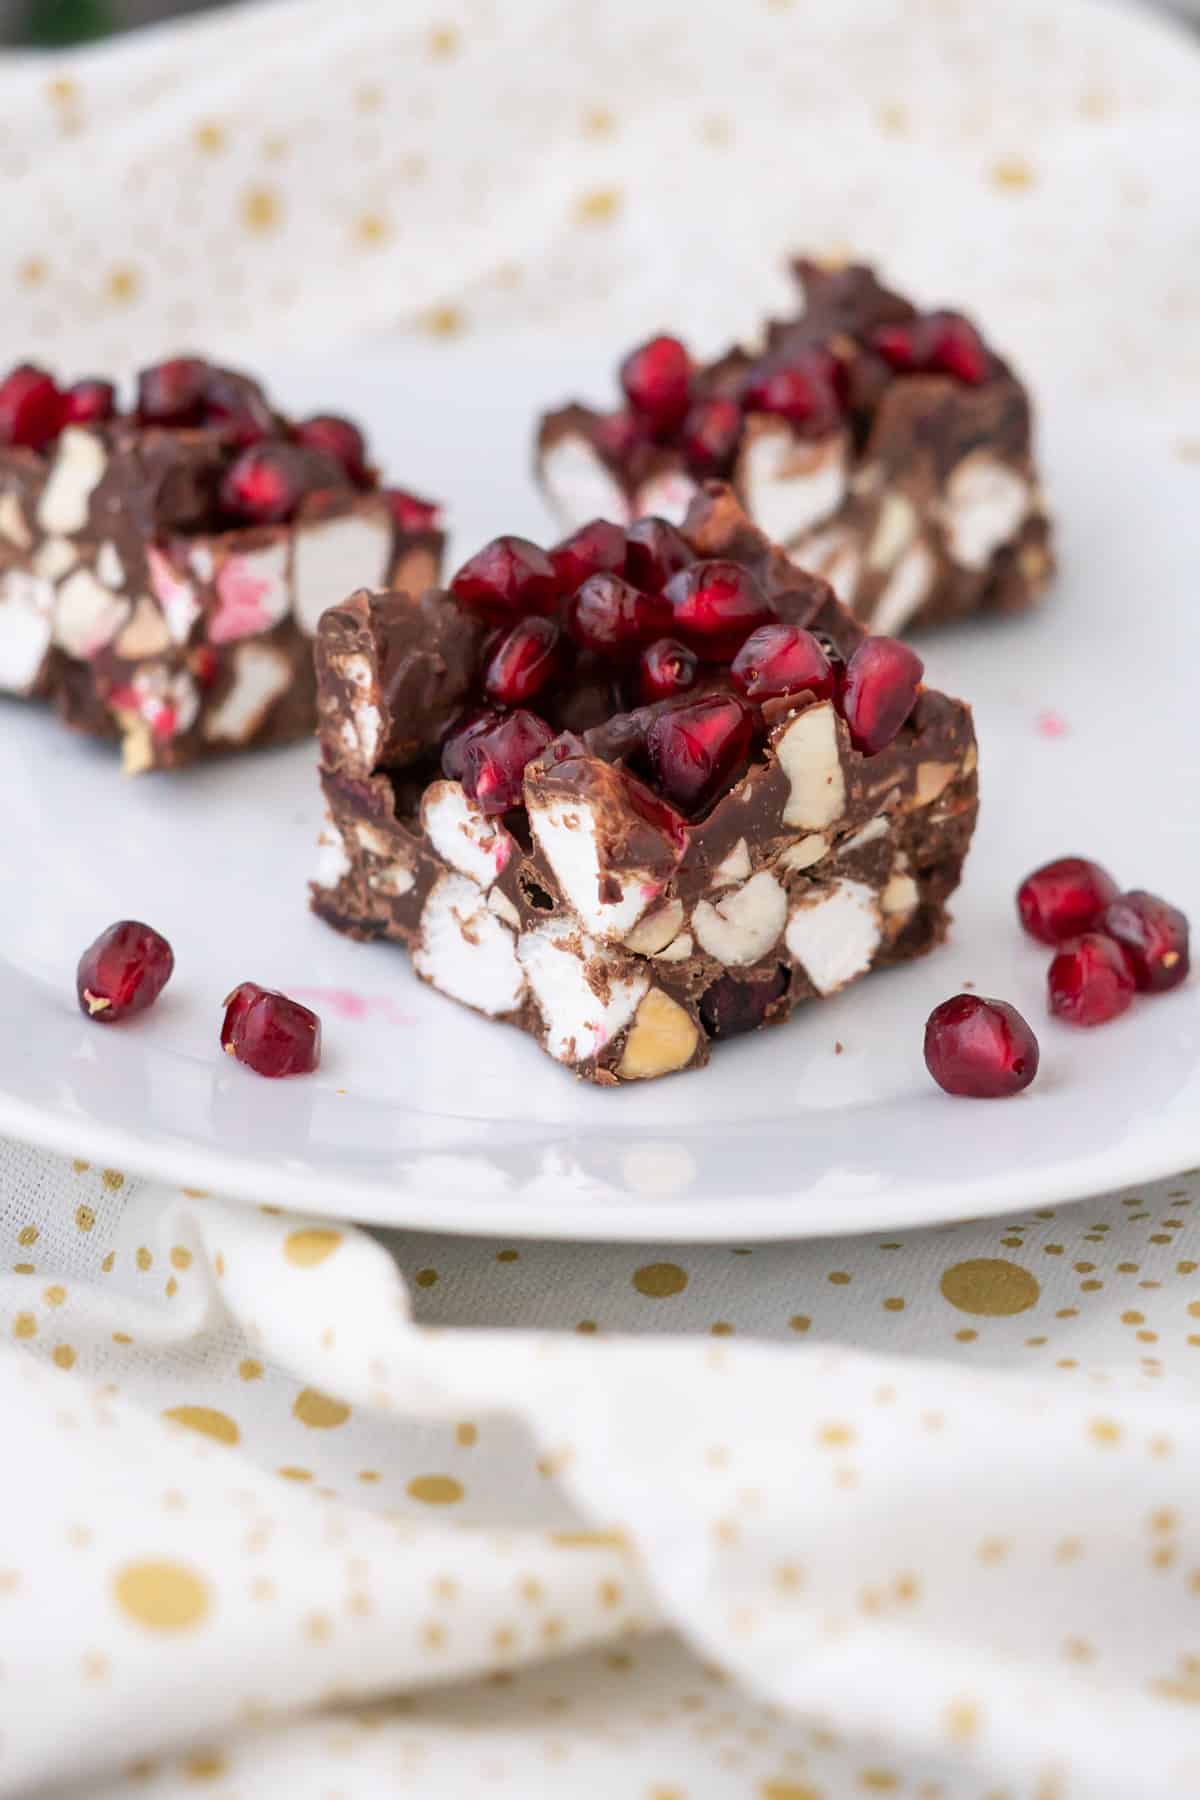 Side view of three squares of Christmas Rocky Road on a plate to show layers of chocolate, almonds, marshmallows, and pomegranate seeds.